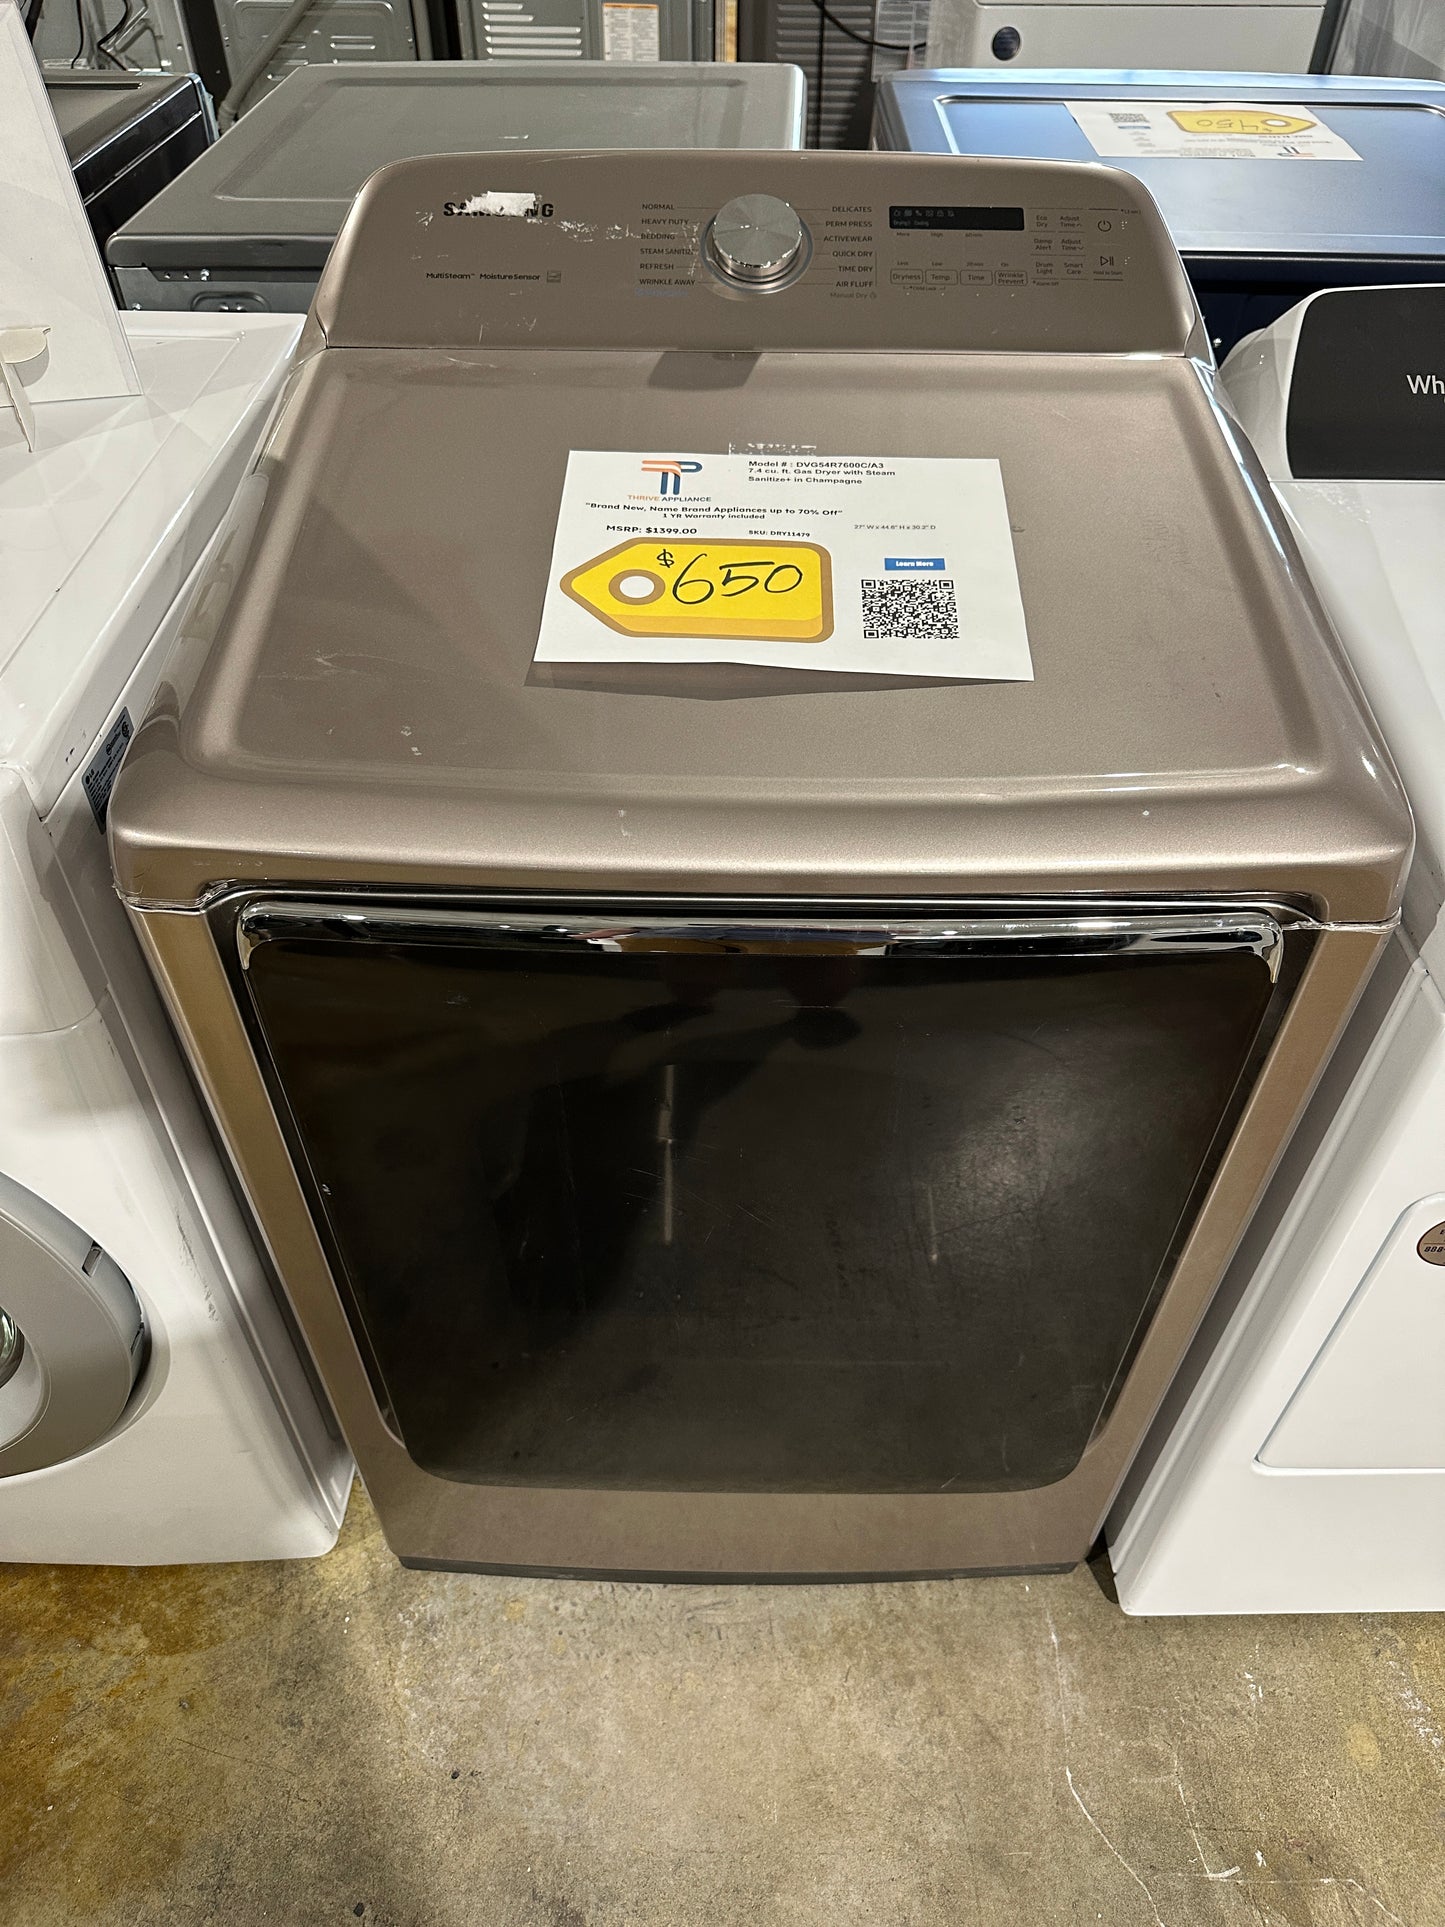 NEW SAMSUNG ELECTRIC DRYER with STEAM and SENSOR DRY MODEL: DVG54R7600C  DRY11479S